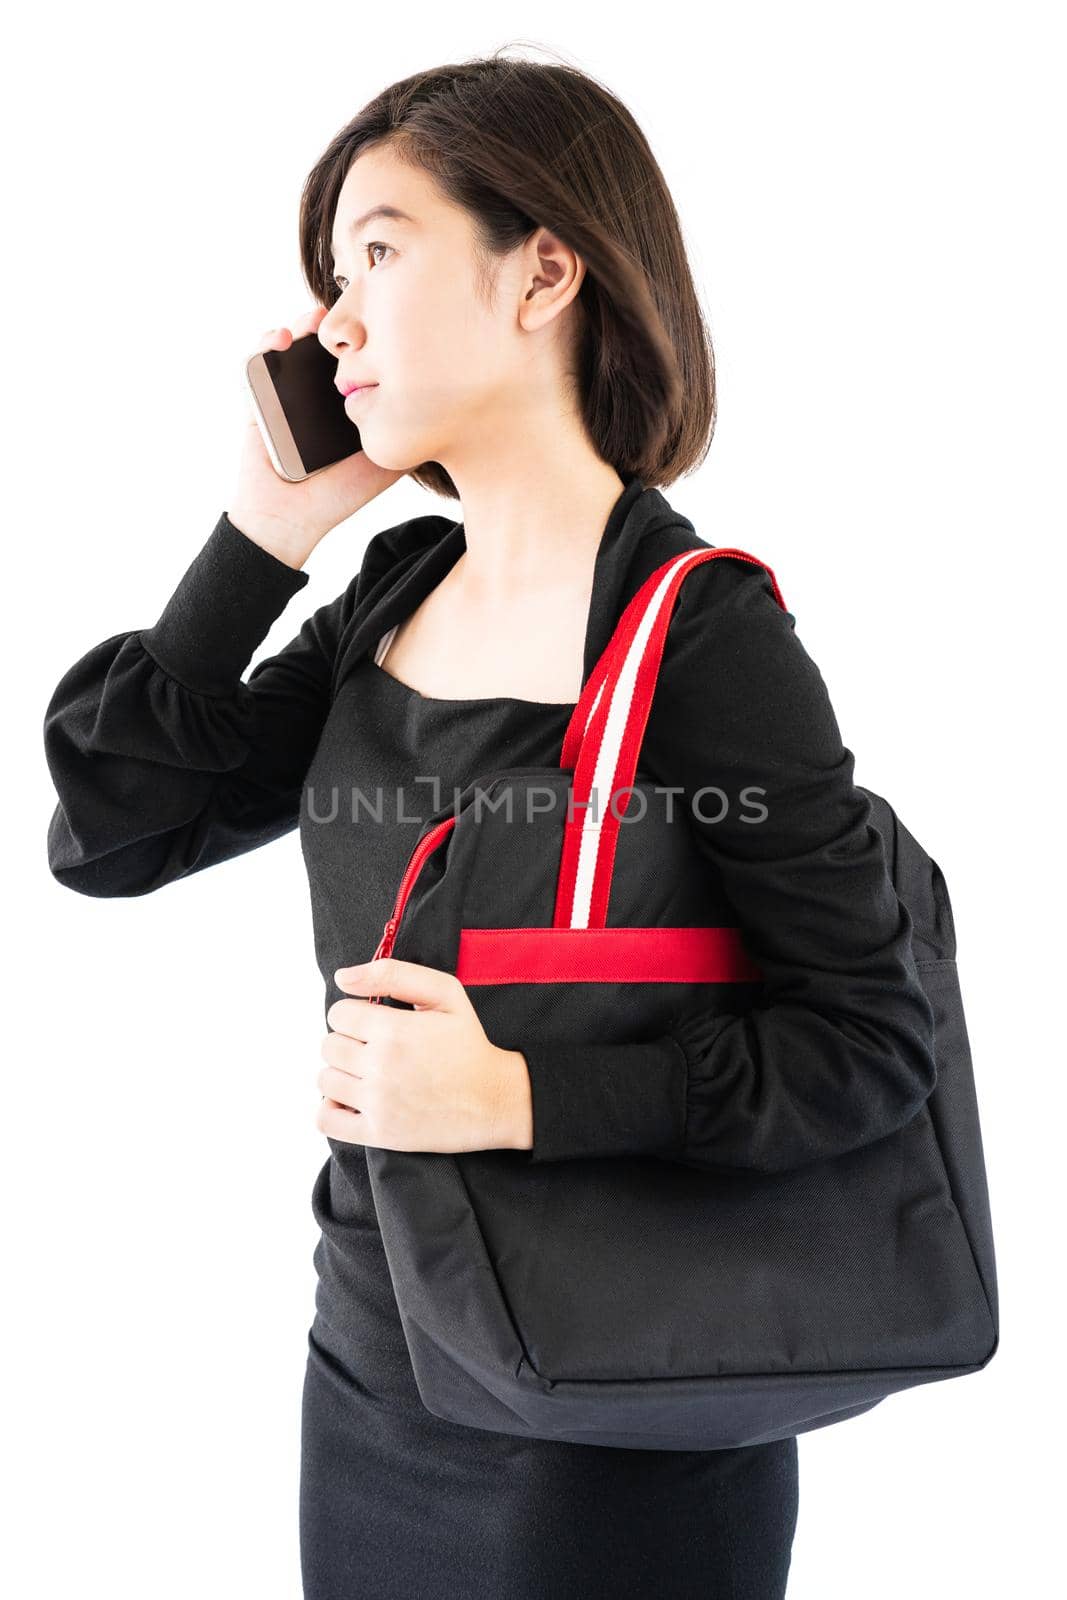 Woman carrying a black shopping bag using cellphone shopping online isolate on white background